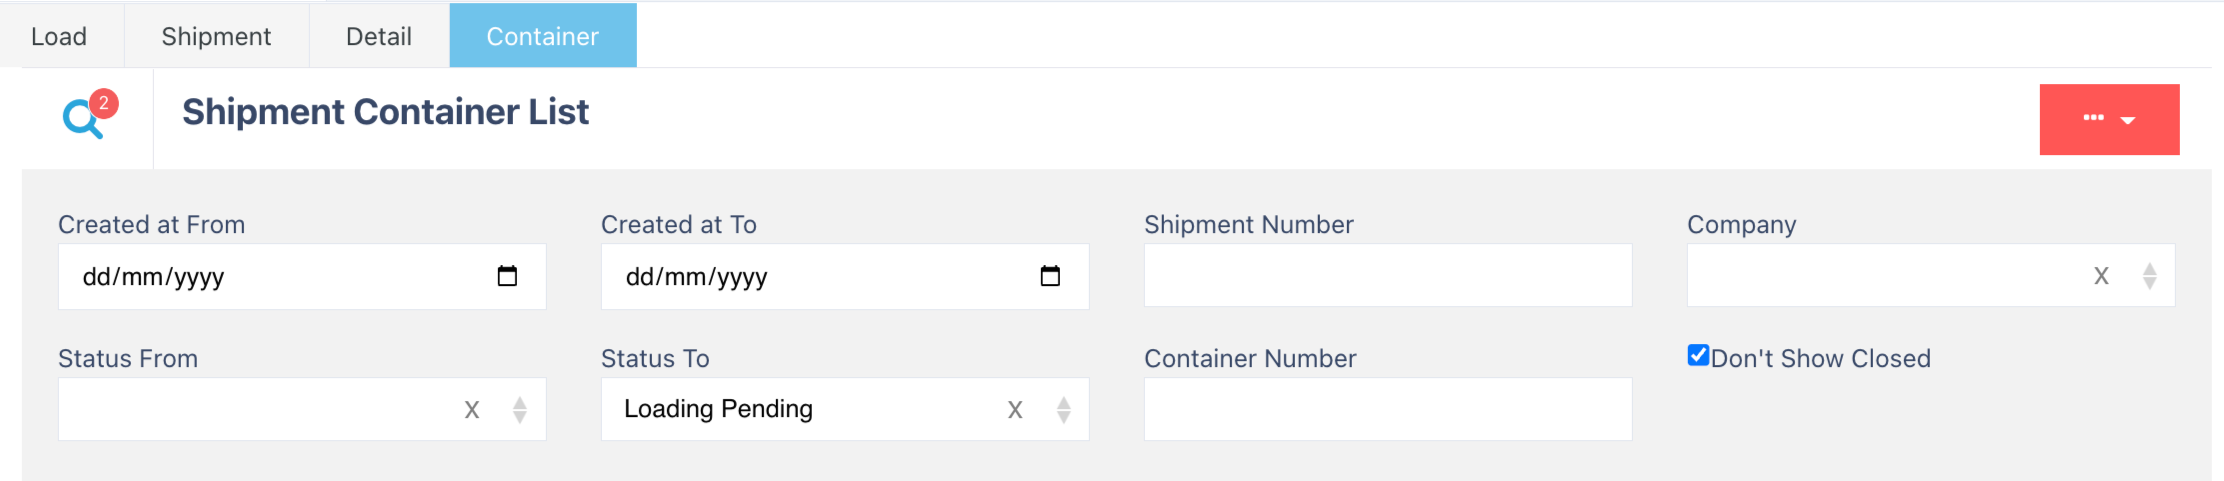 shipment container search